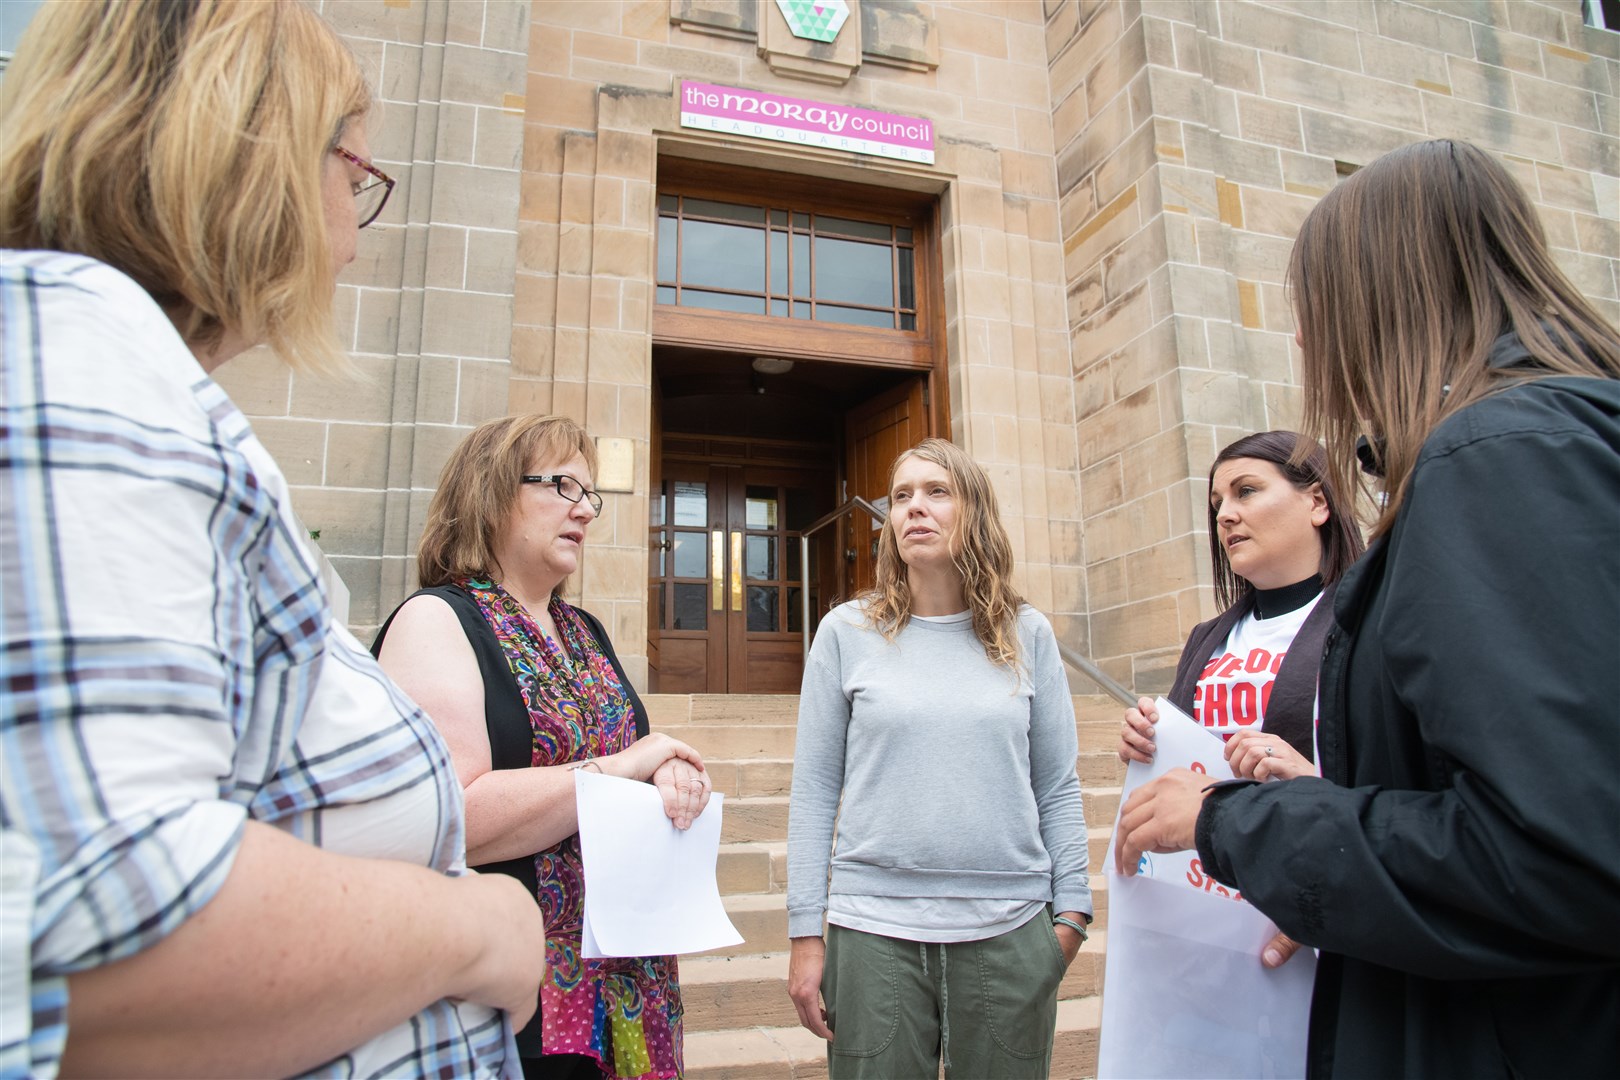 Cllr Sonya Warren speaks to some of the protesters. ..Demonstrators gather outside Moray Council's Headquarters ahead of a full council meeting to protest the proposed cuts to school staff. ..Picture: Daniel Forsyth..